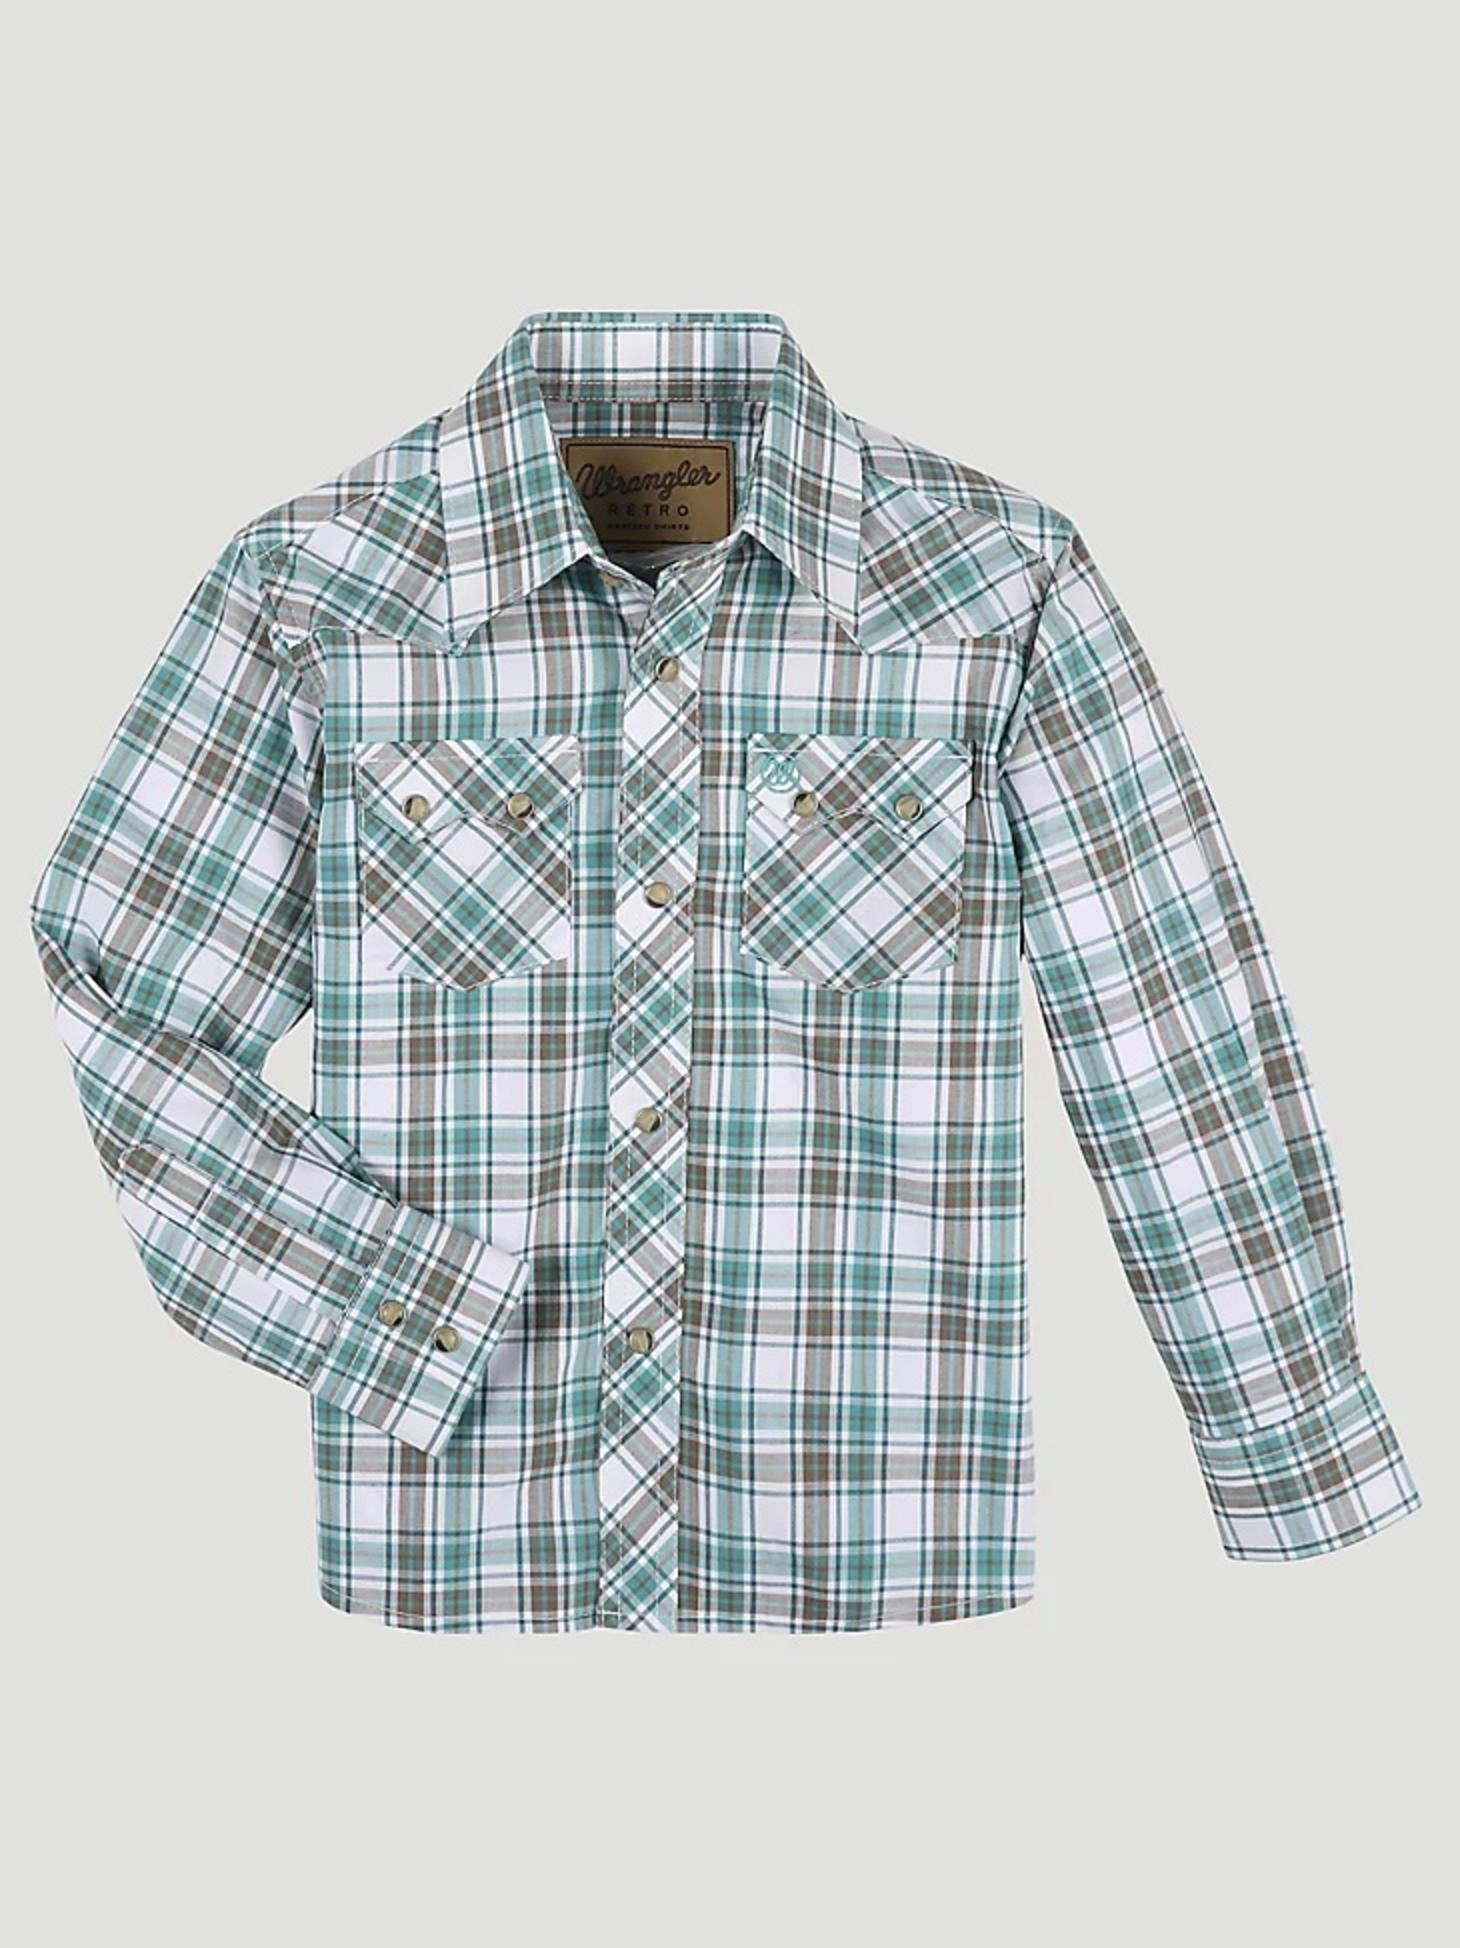  Boy's Wrangler Retro® Western Snap Plaid Shirt With Front Sawtooth Pockets In Minty FRONT VIEW